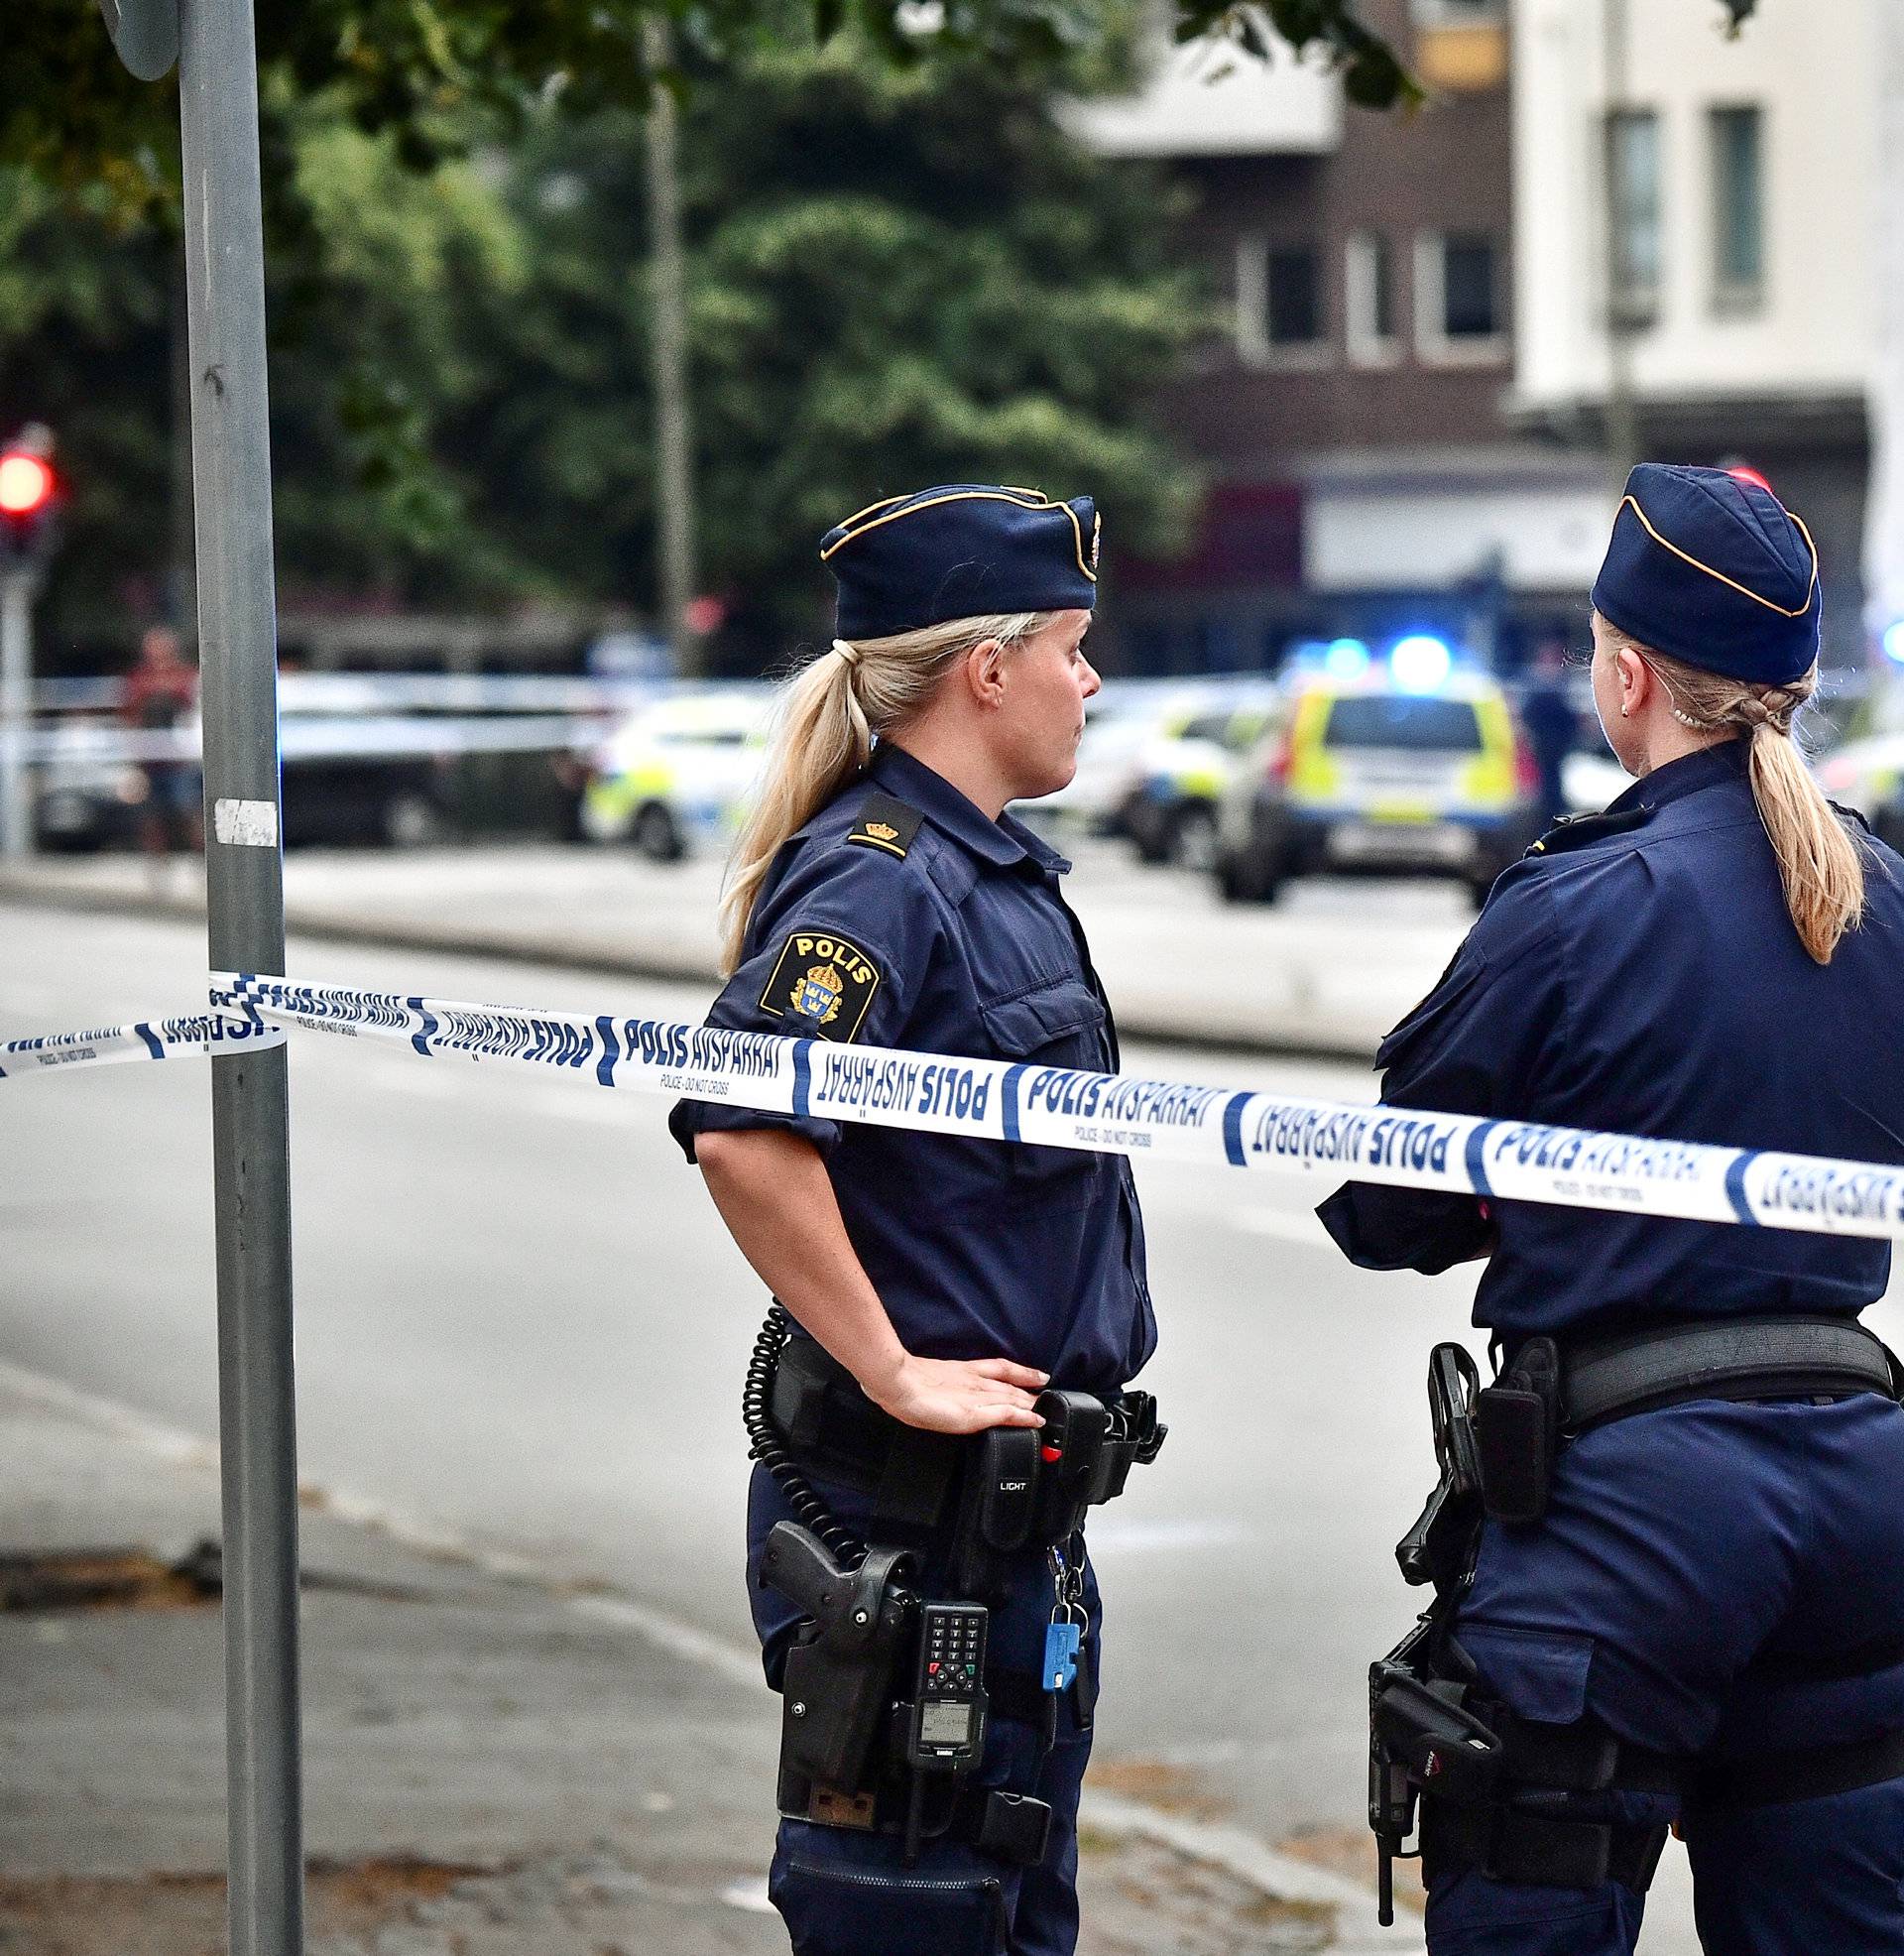 Police stand next to a cordon after a shooting on a street in central Malmo